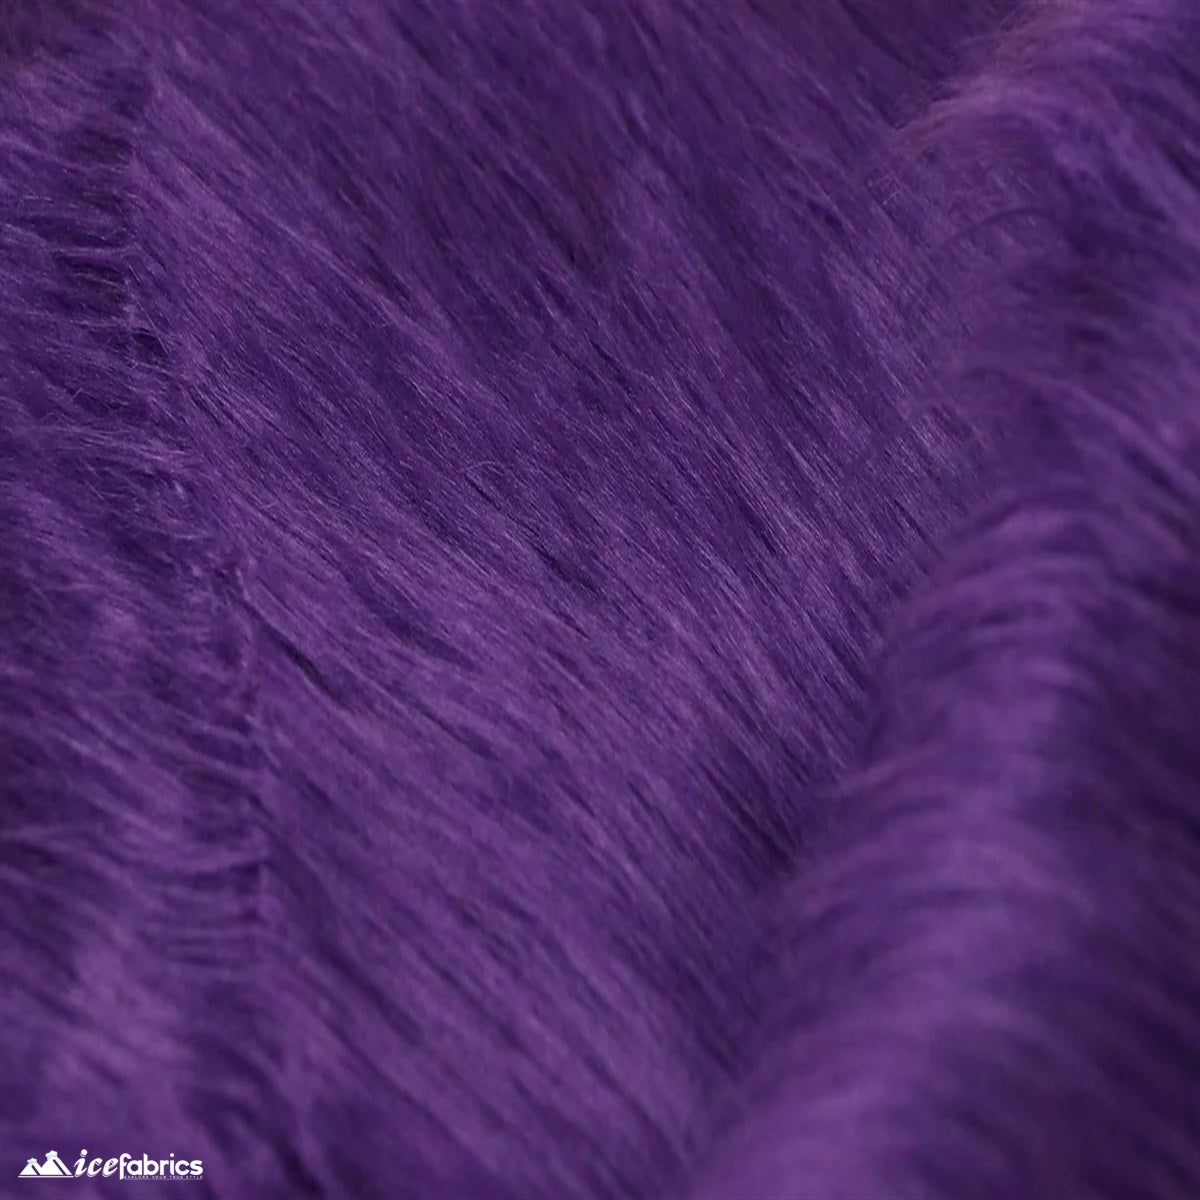 Mohair Faux Fur Fabric By The Roll (20 Yards) 4 Inch PileICE FABRICSICE FABRICSPurpleBy The Roll (60" Wide)Mohair Faux Fur Fabric By The Roll (20 Yards) 4 Inch Pile ICE FABRICS